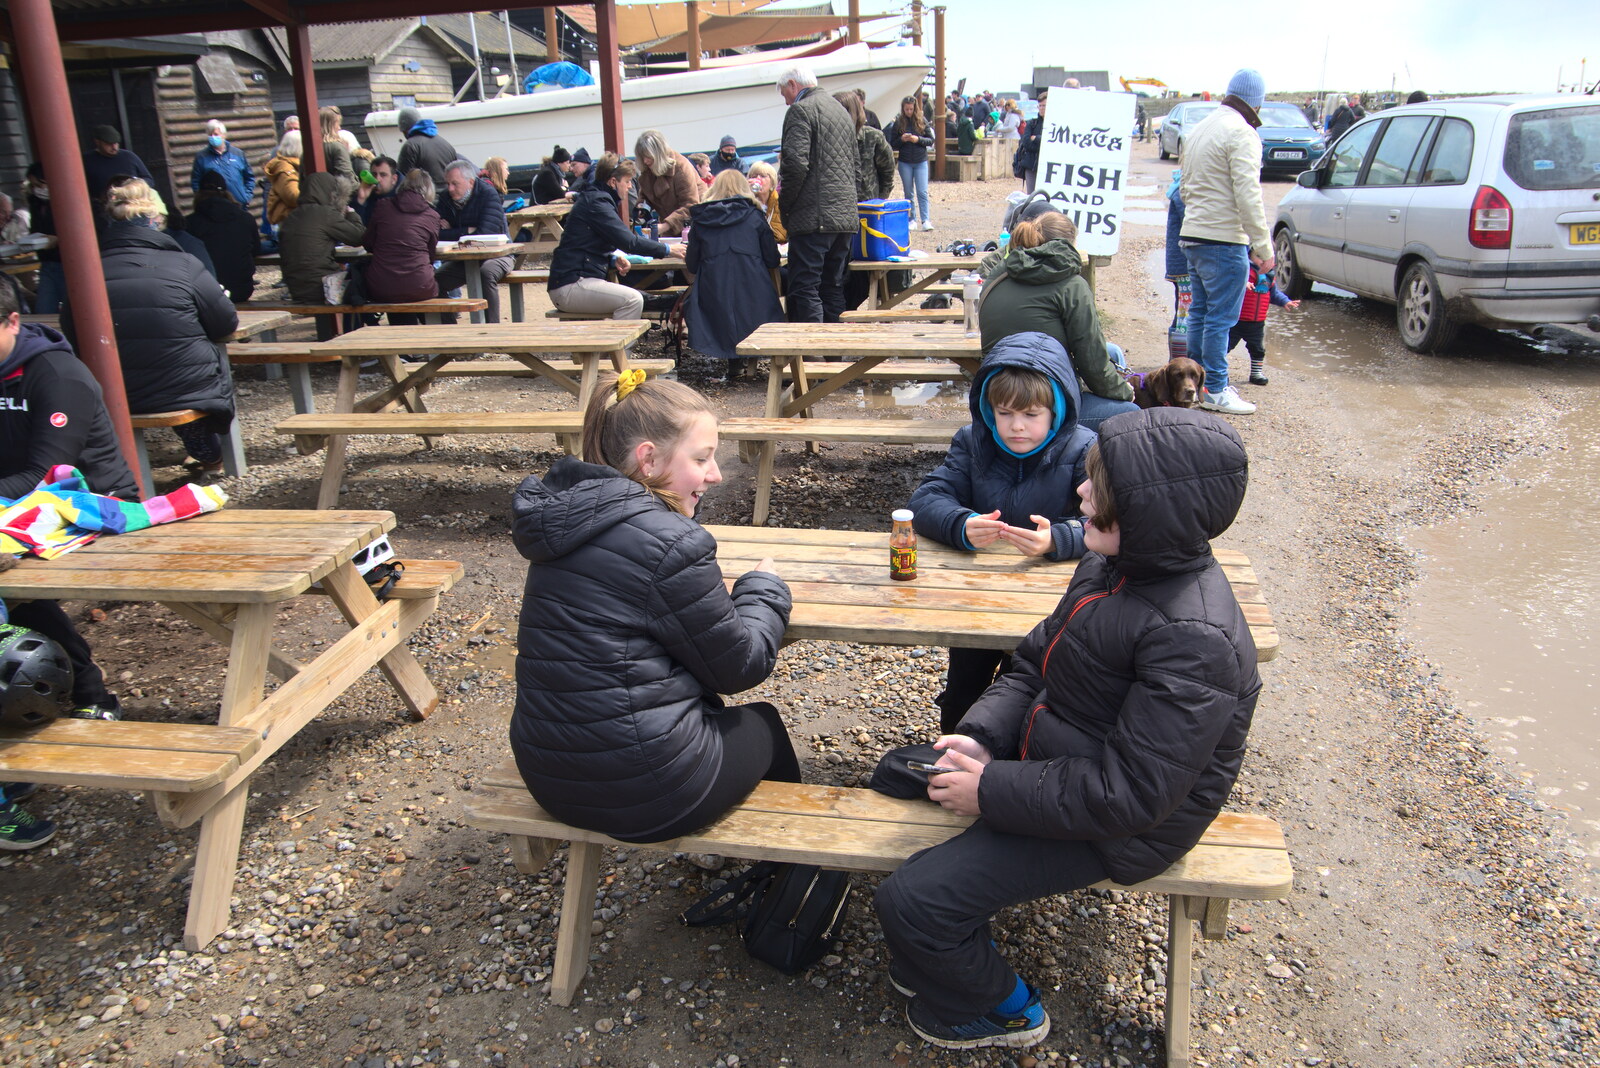 We wait for fish and chips from A Chilly Trip to the Beach, Southwold Harbour, Suffolk - 2nd May 2021